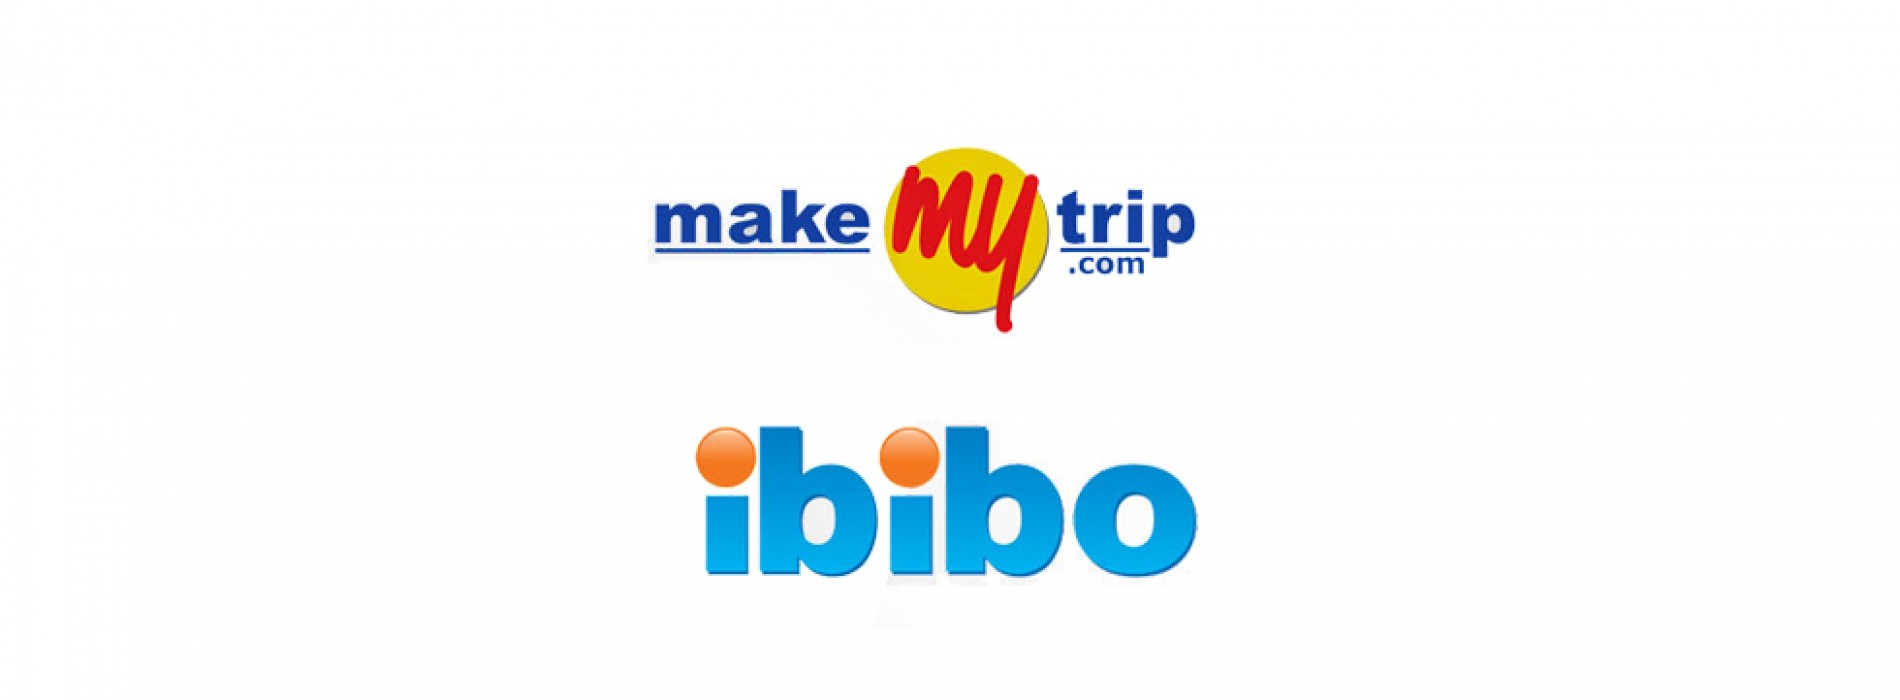 MakeMyTrip-ibibo merger: More power to consumers; rivals better watch out